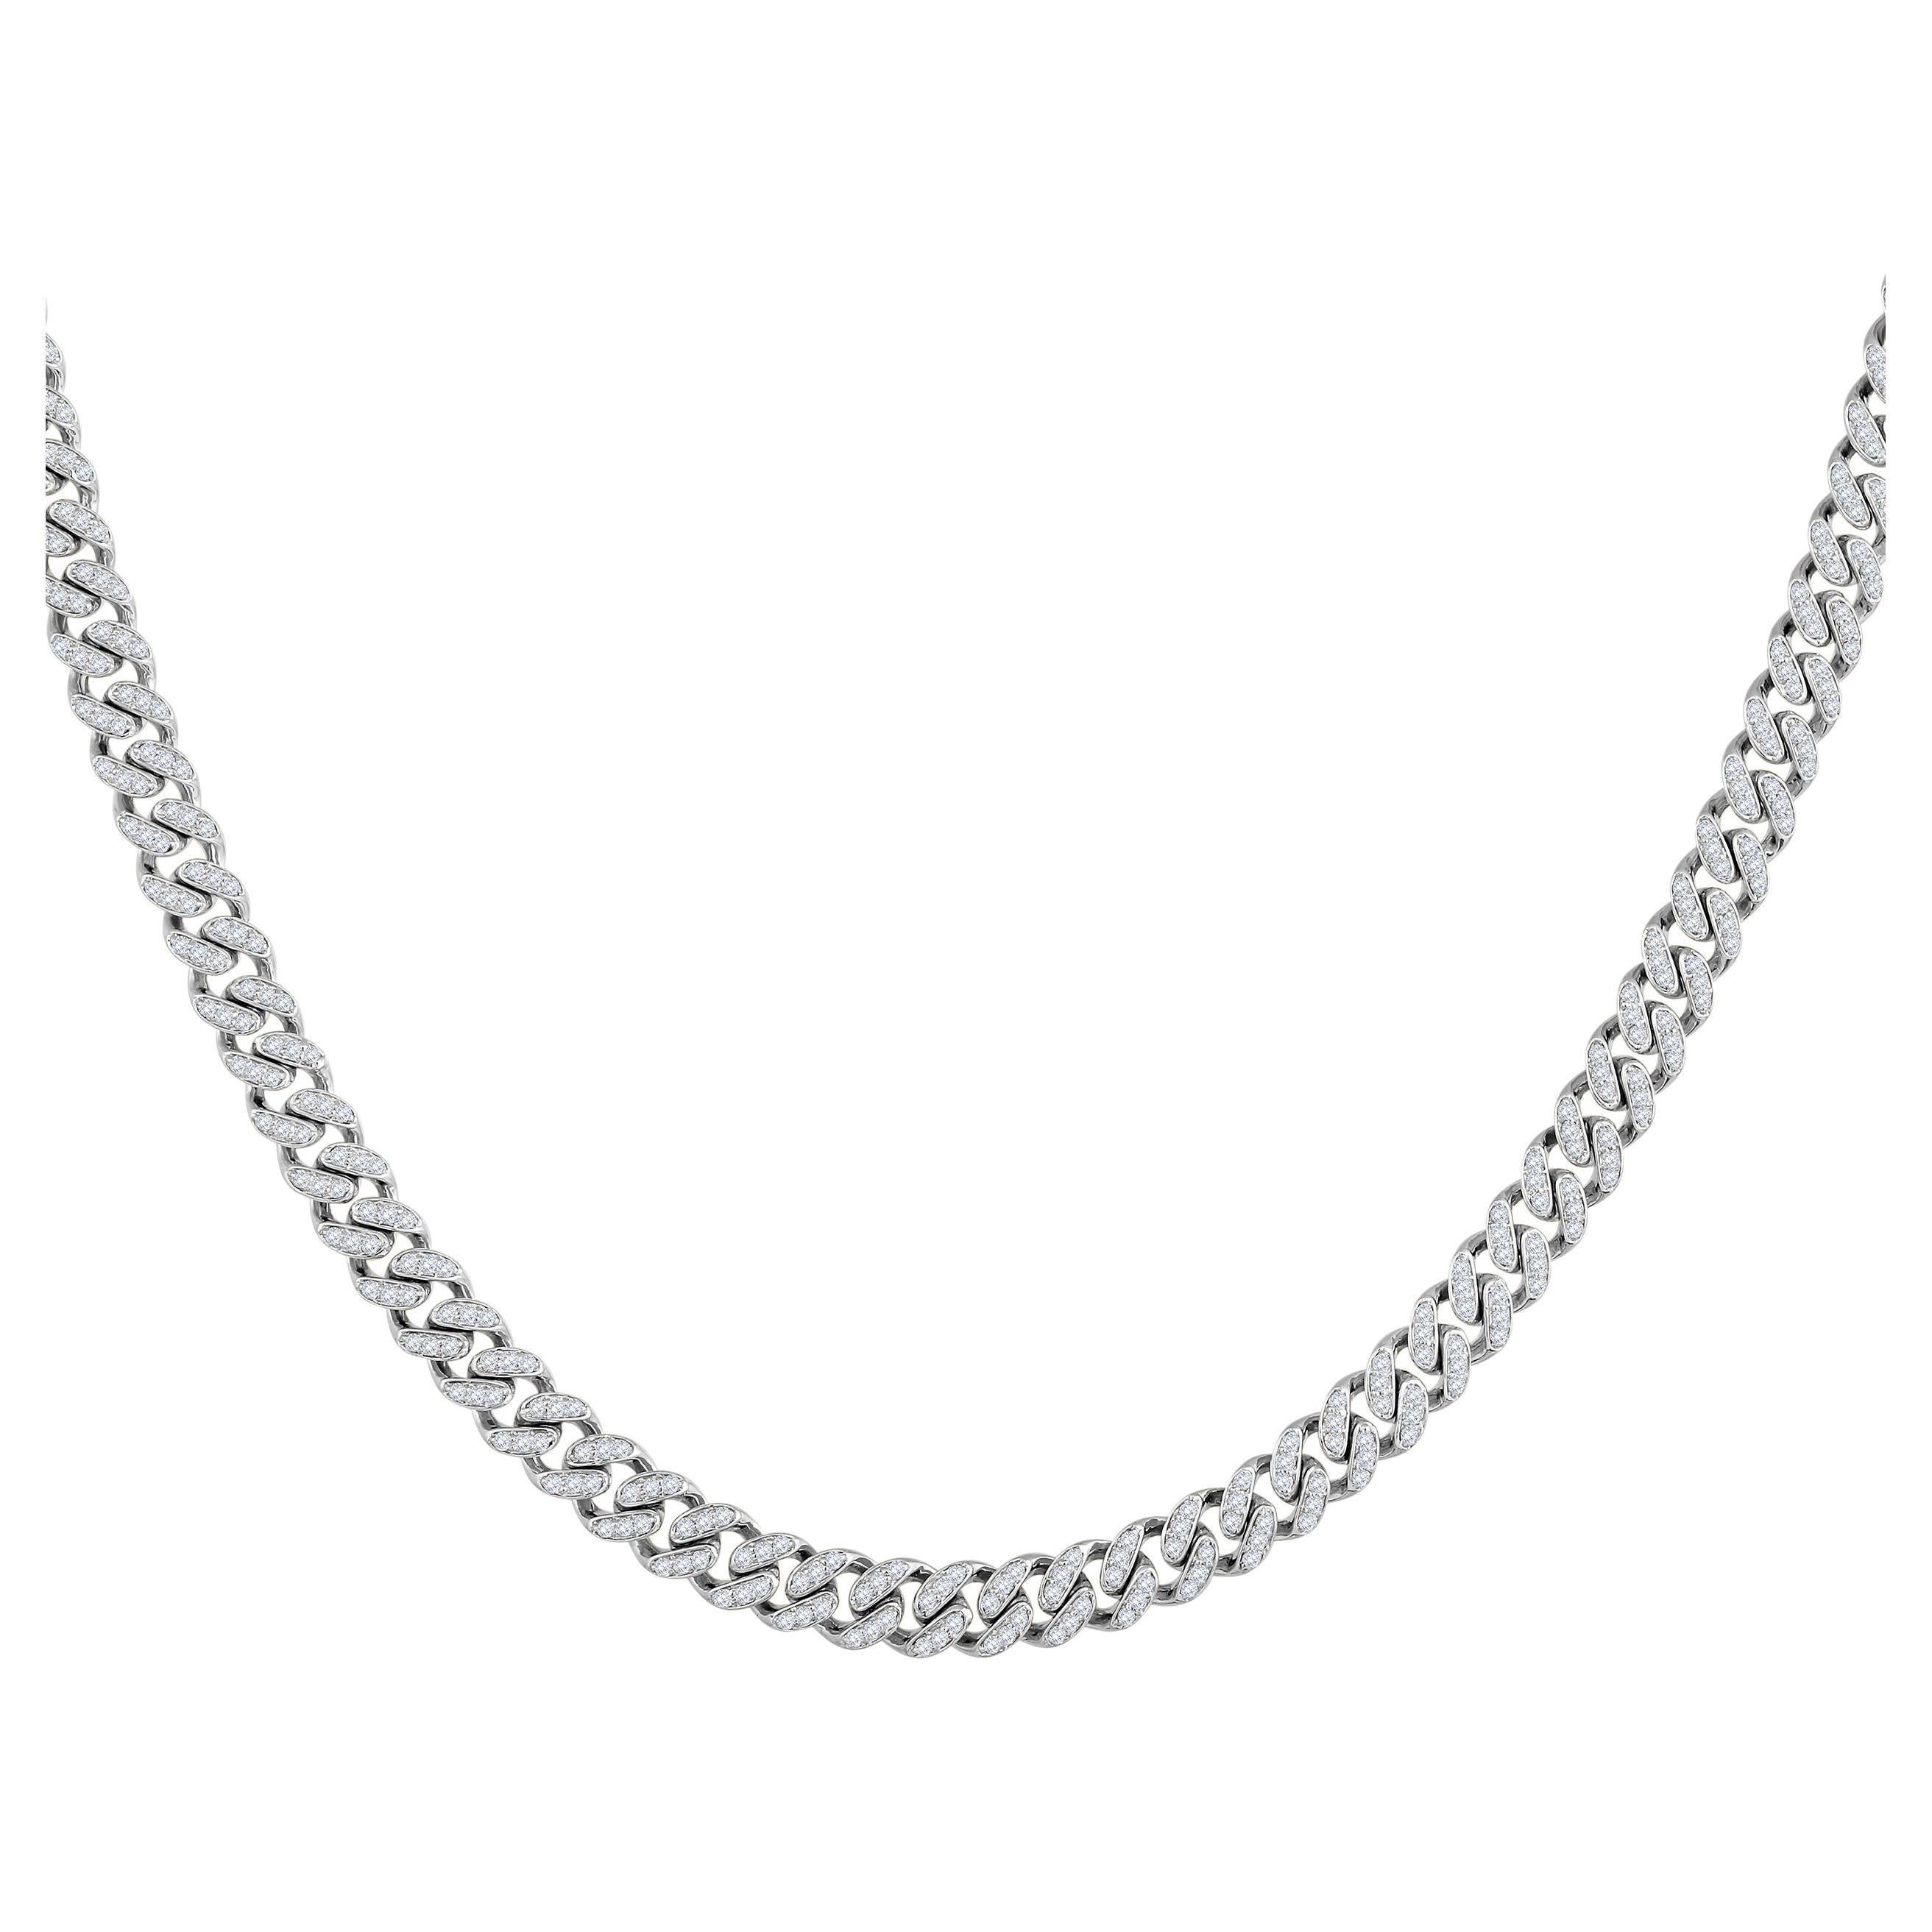 Certified 10k Gold 1.8 Carat Natural Diamond Cuban Chain Link White Necklace